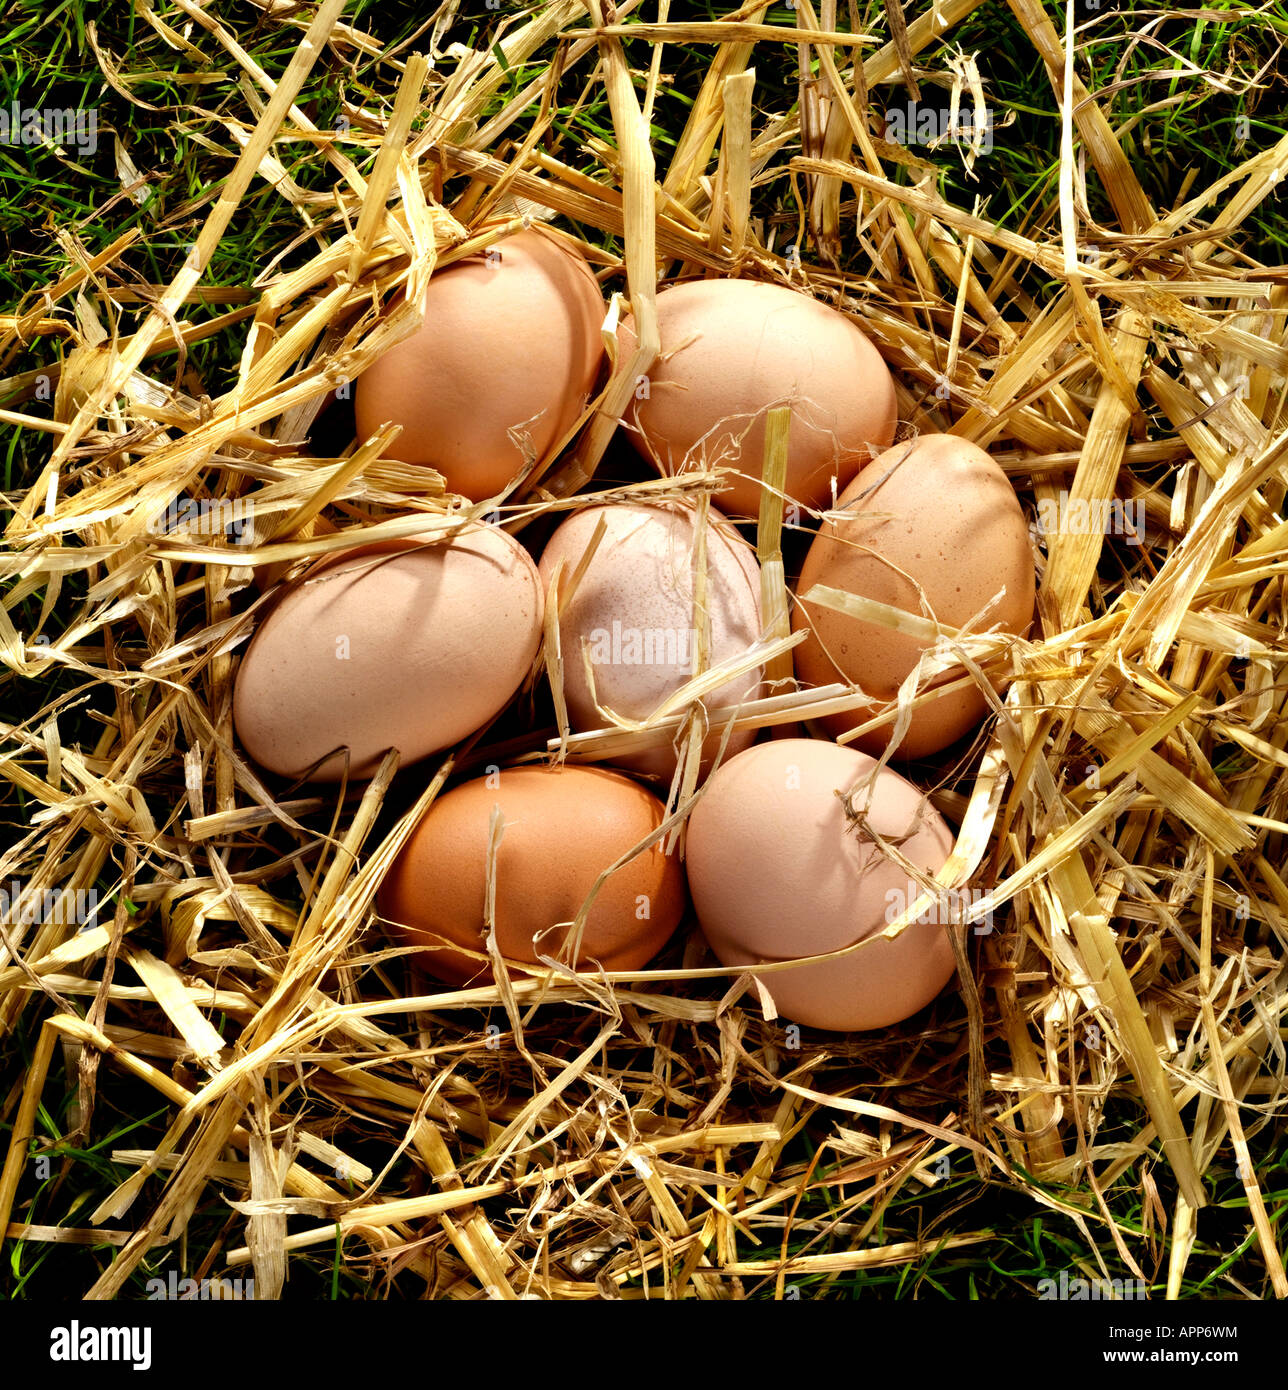 Fresh hens eggs in a straw nest on grass. Stock Photo